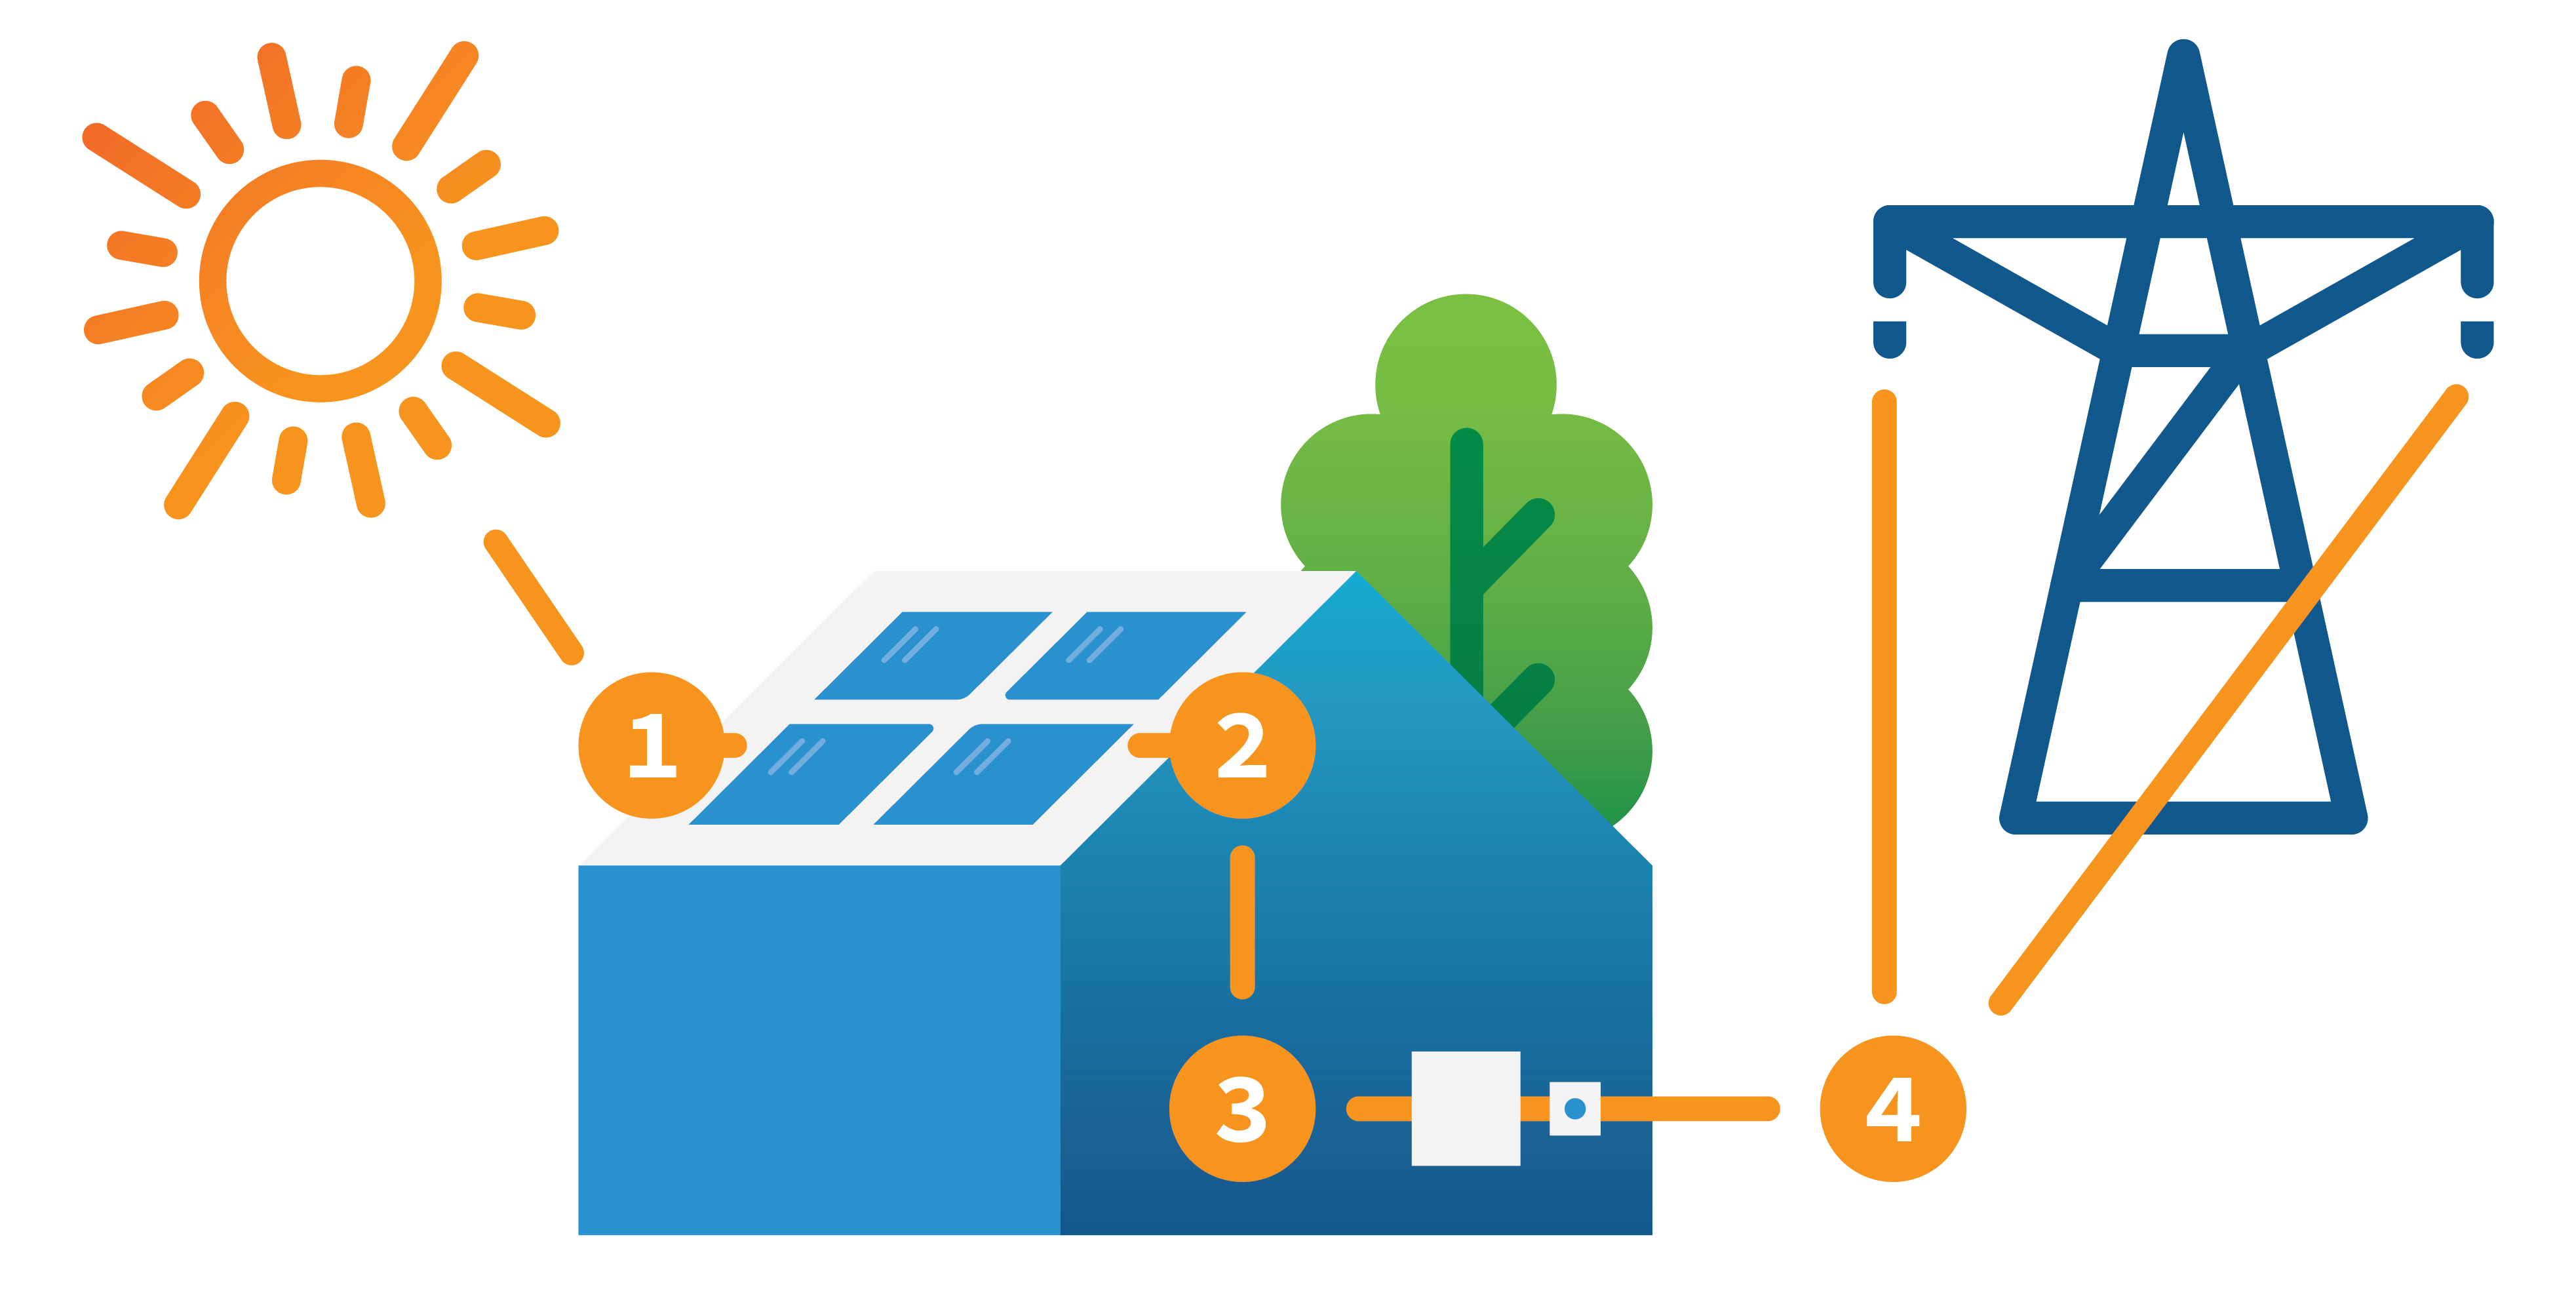 An inverter takes the DC power directly from the solar panels and converts it to the same AC power that your home uses.